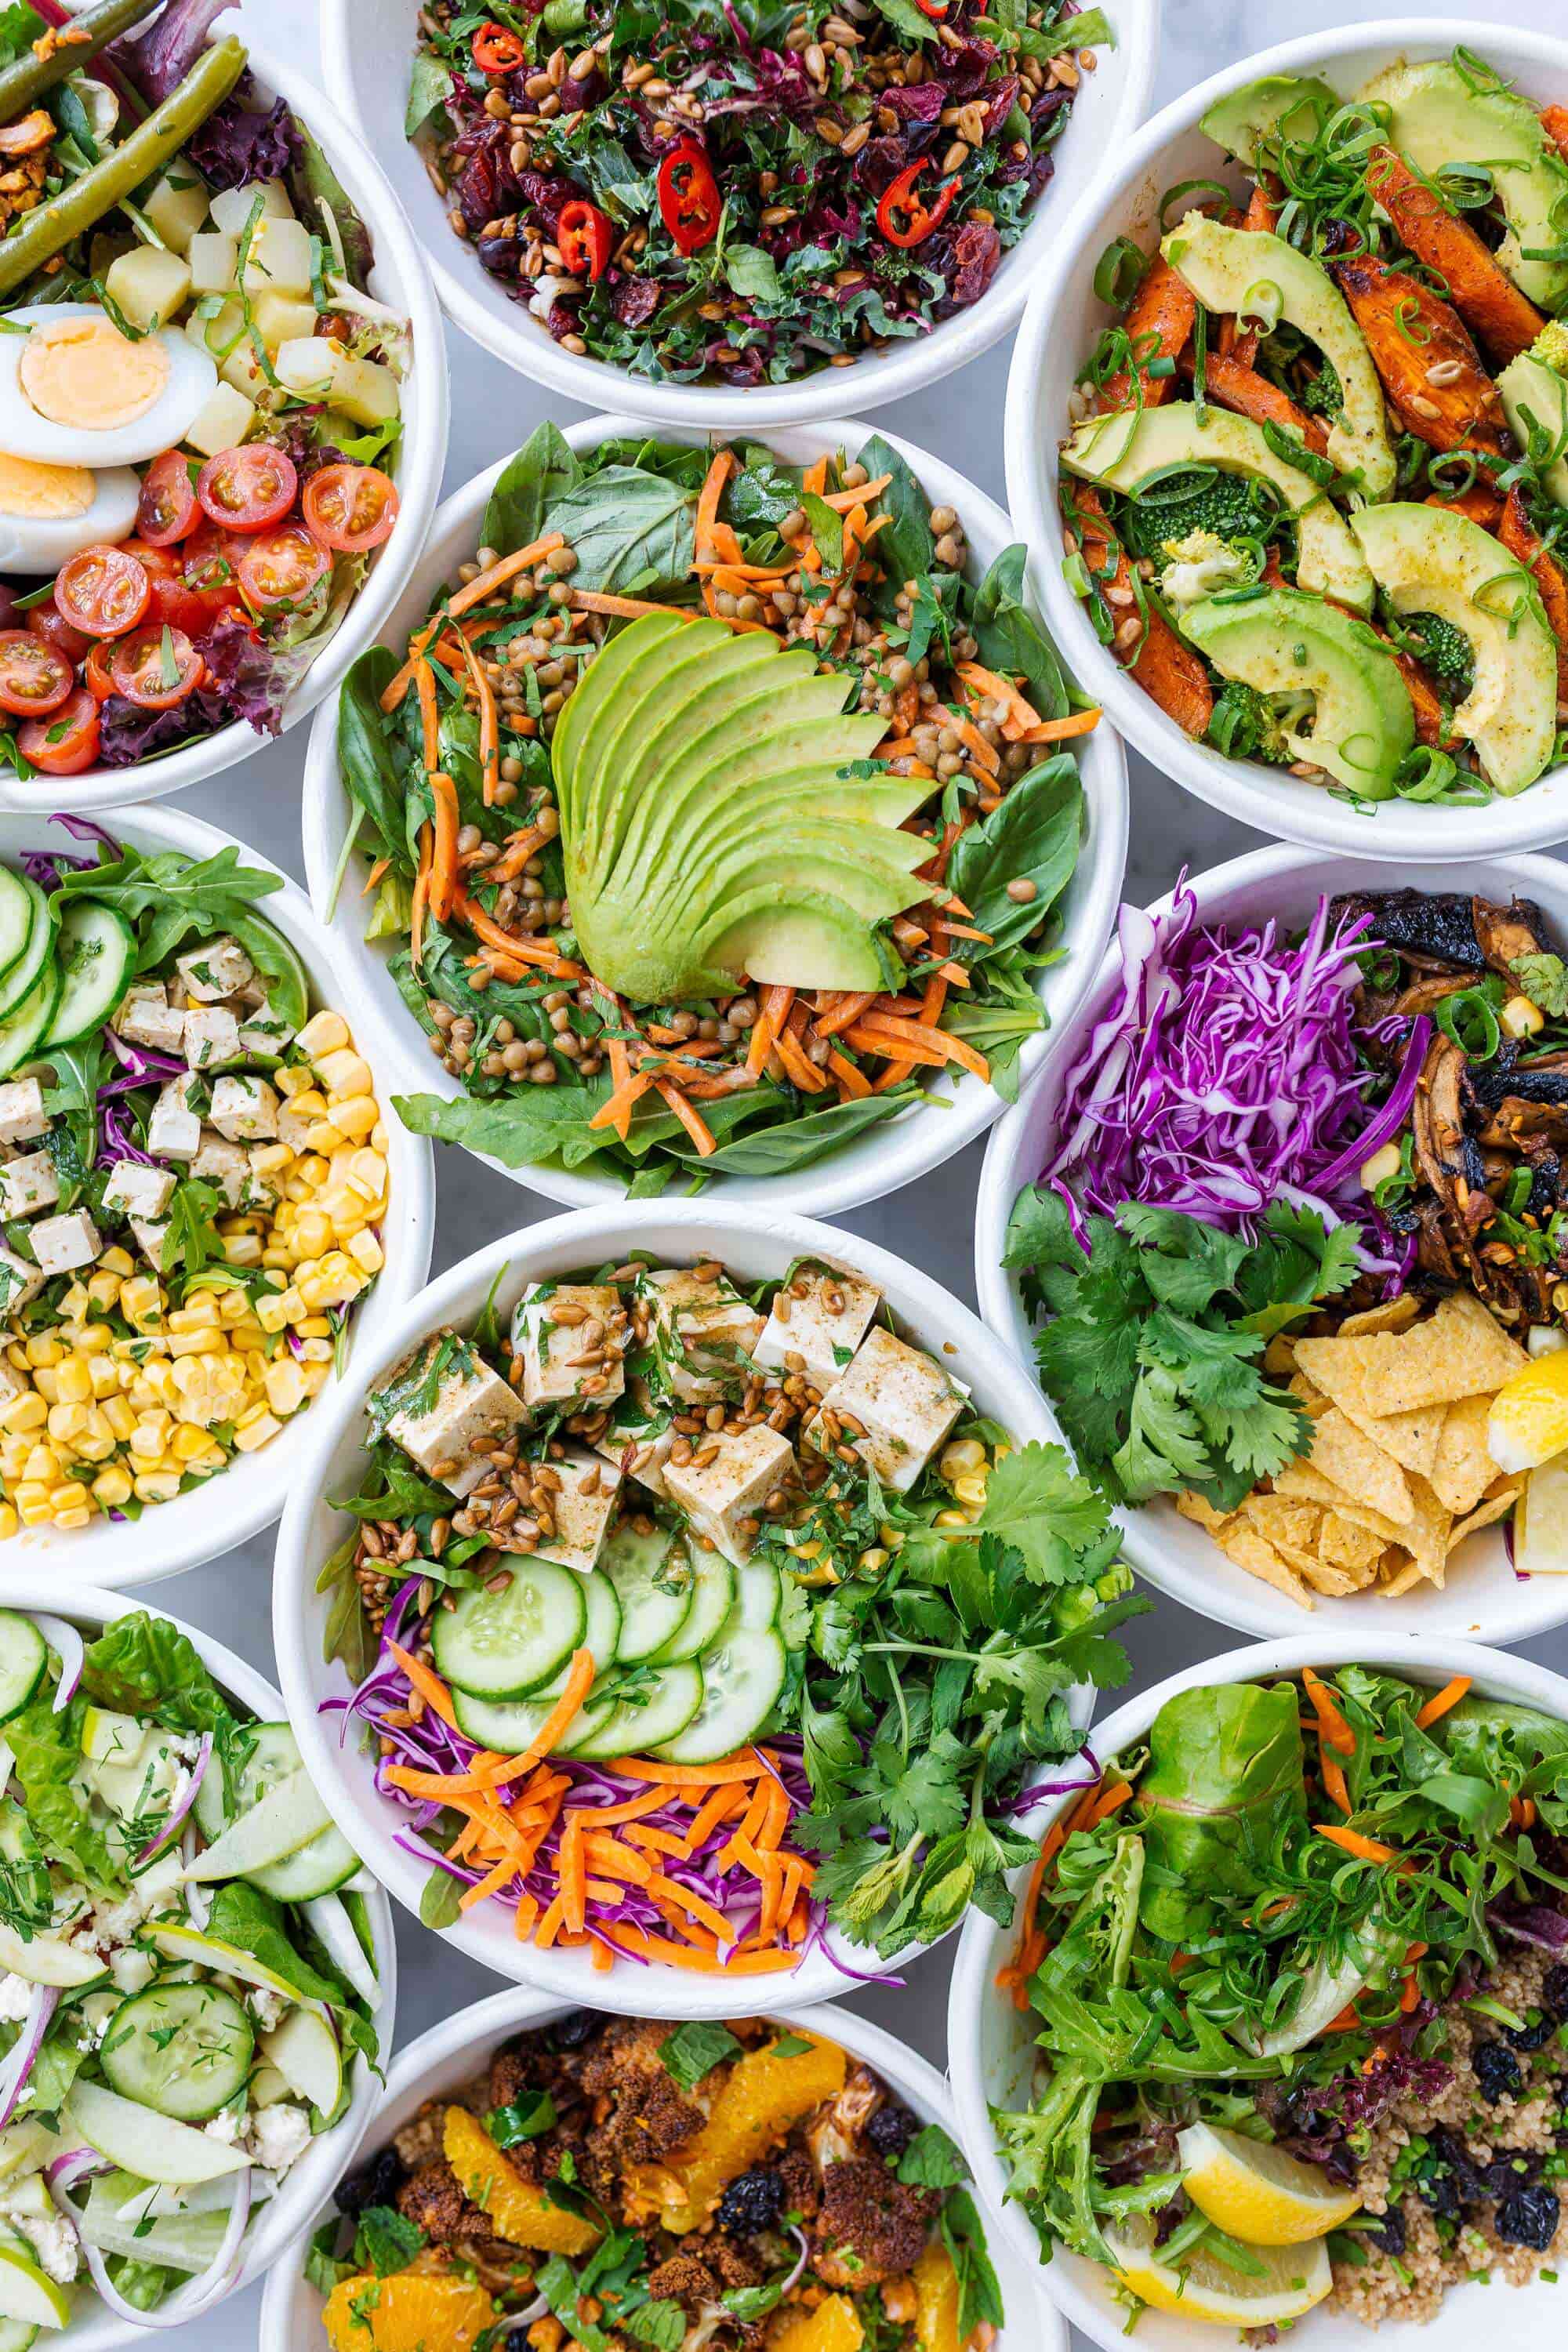 Several bowls of healthy meals, primarily salads and vegetarian